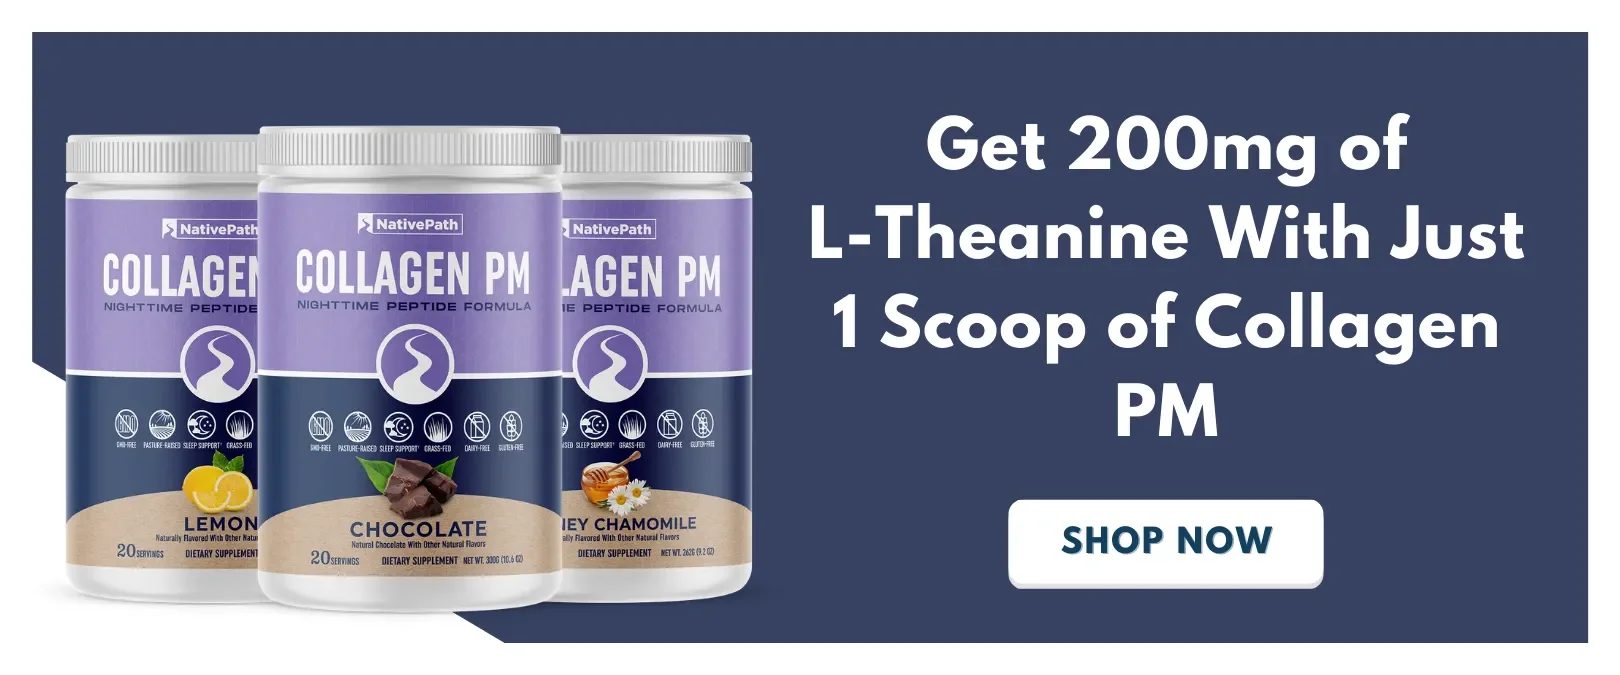 Get 200mg of L-Theanine with Just 1 Scoop of Collagen PM